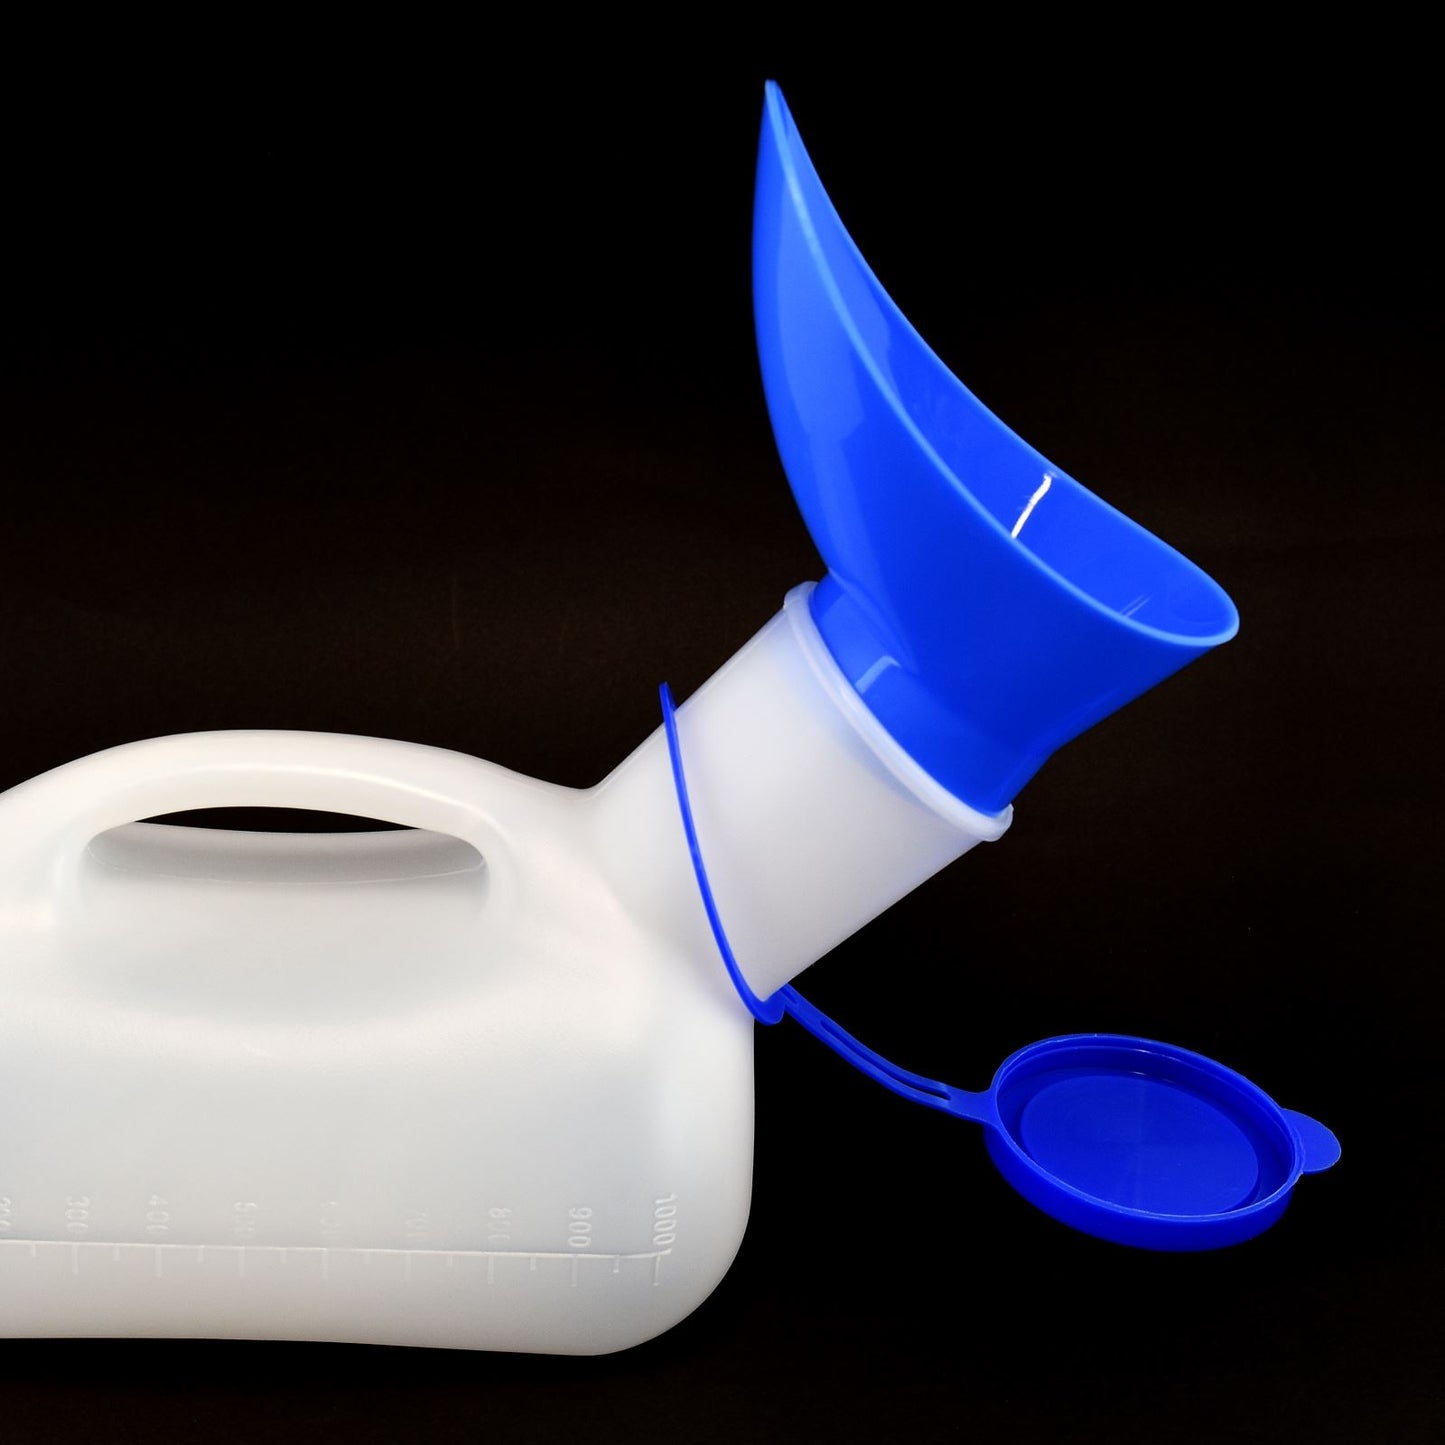 Male Portable Urinal, Pee Bottle for Travel